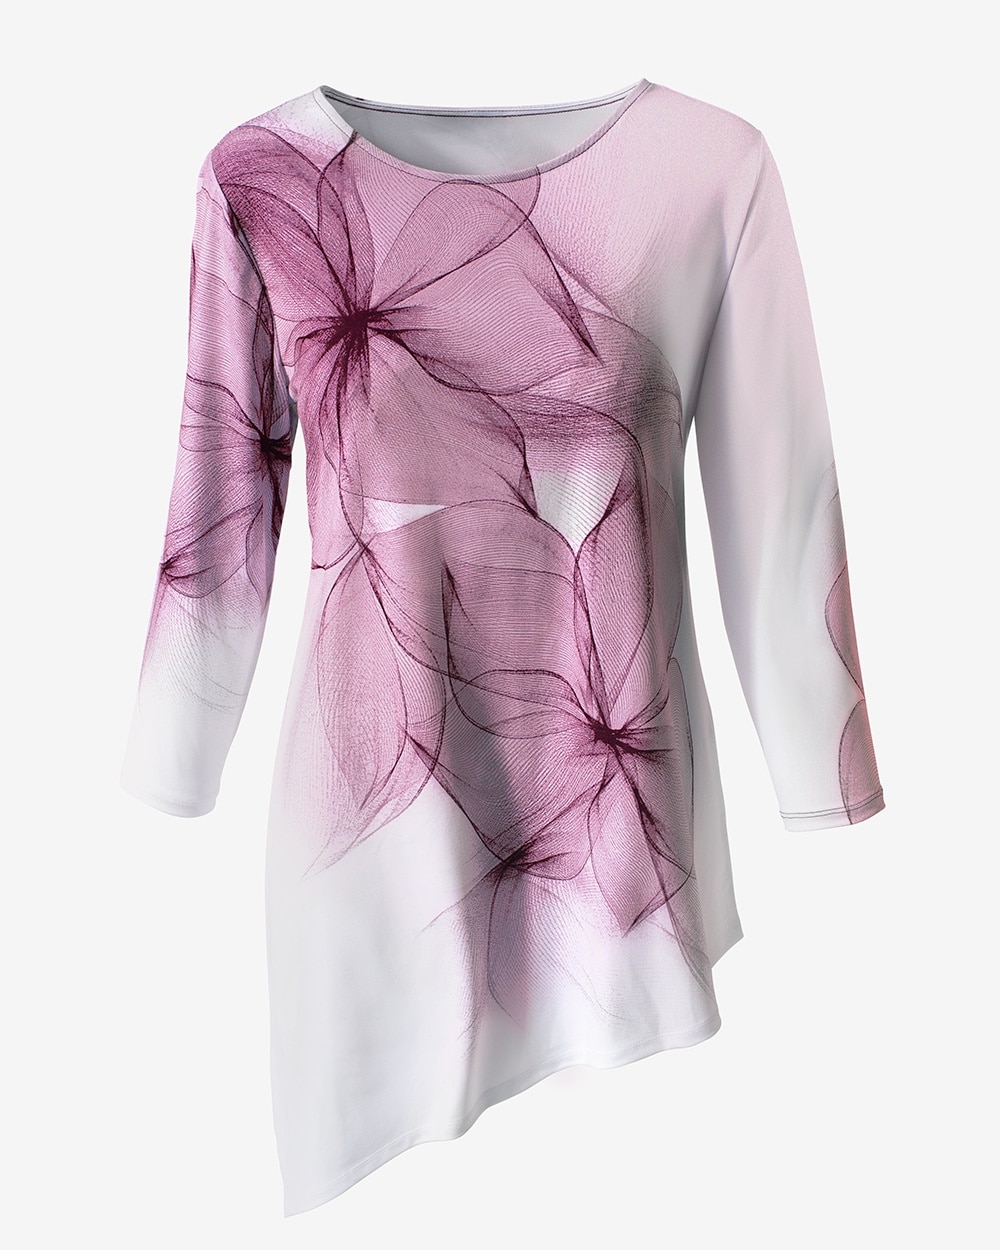 Easywear Sheer Blossoms Tunic